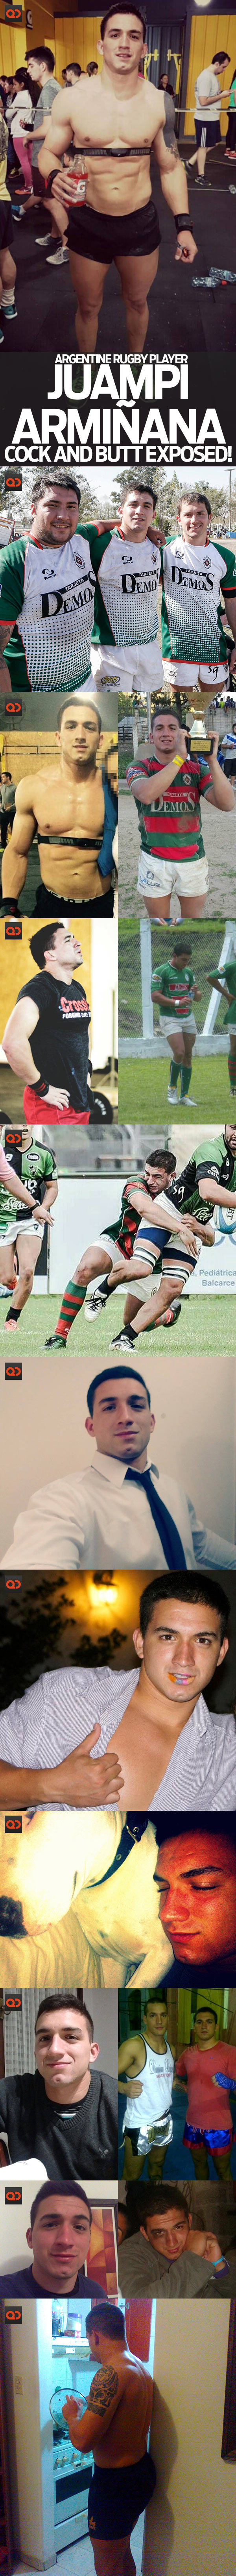 Juampi Armiñana, Argentine Rugby Player, Cock And Butt Exposed!